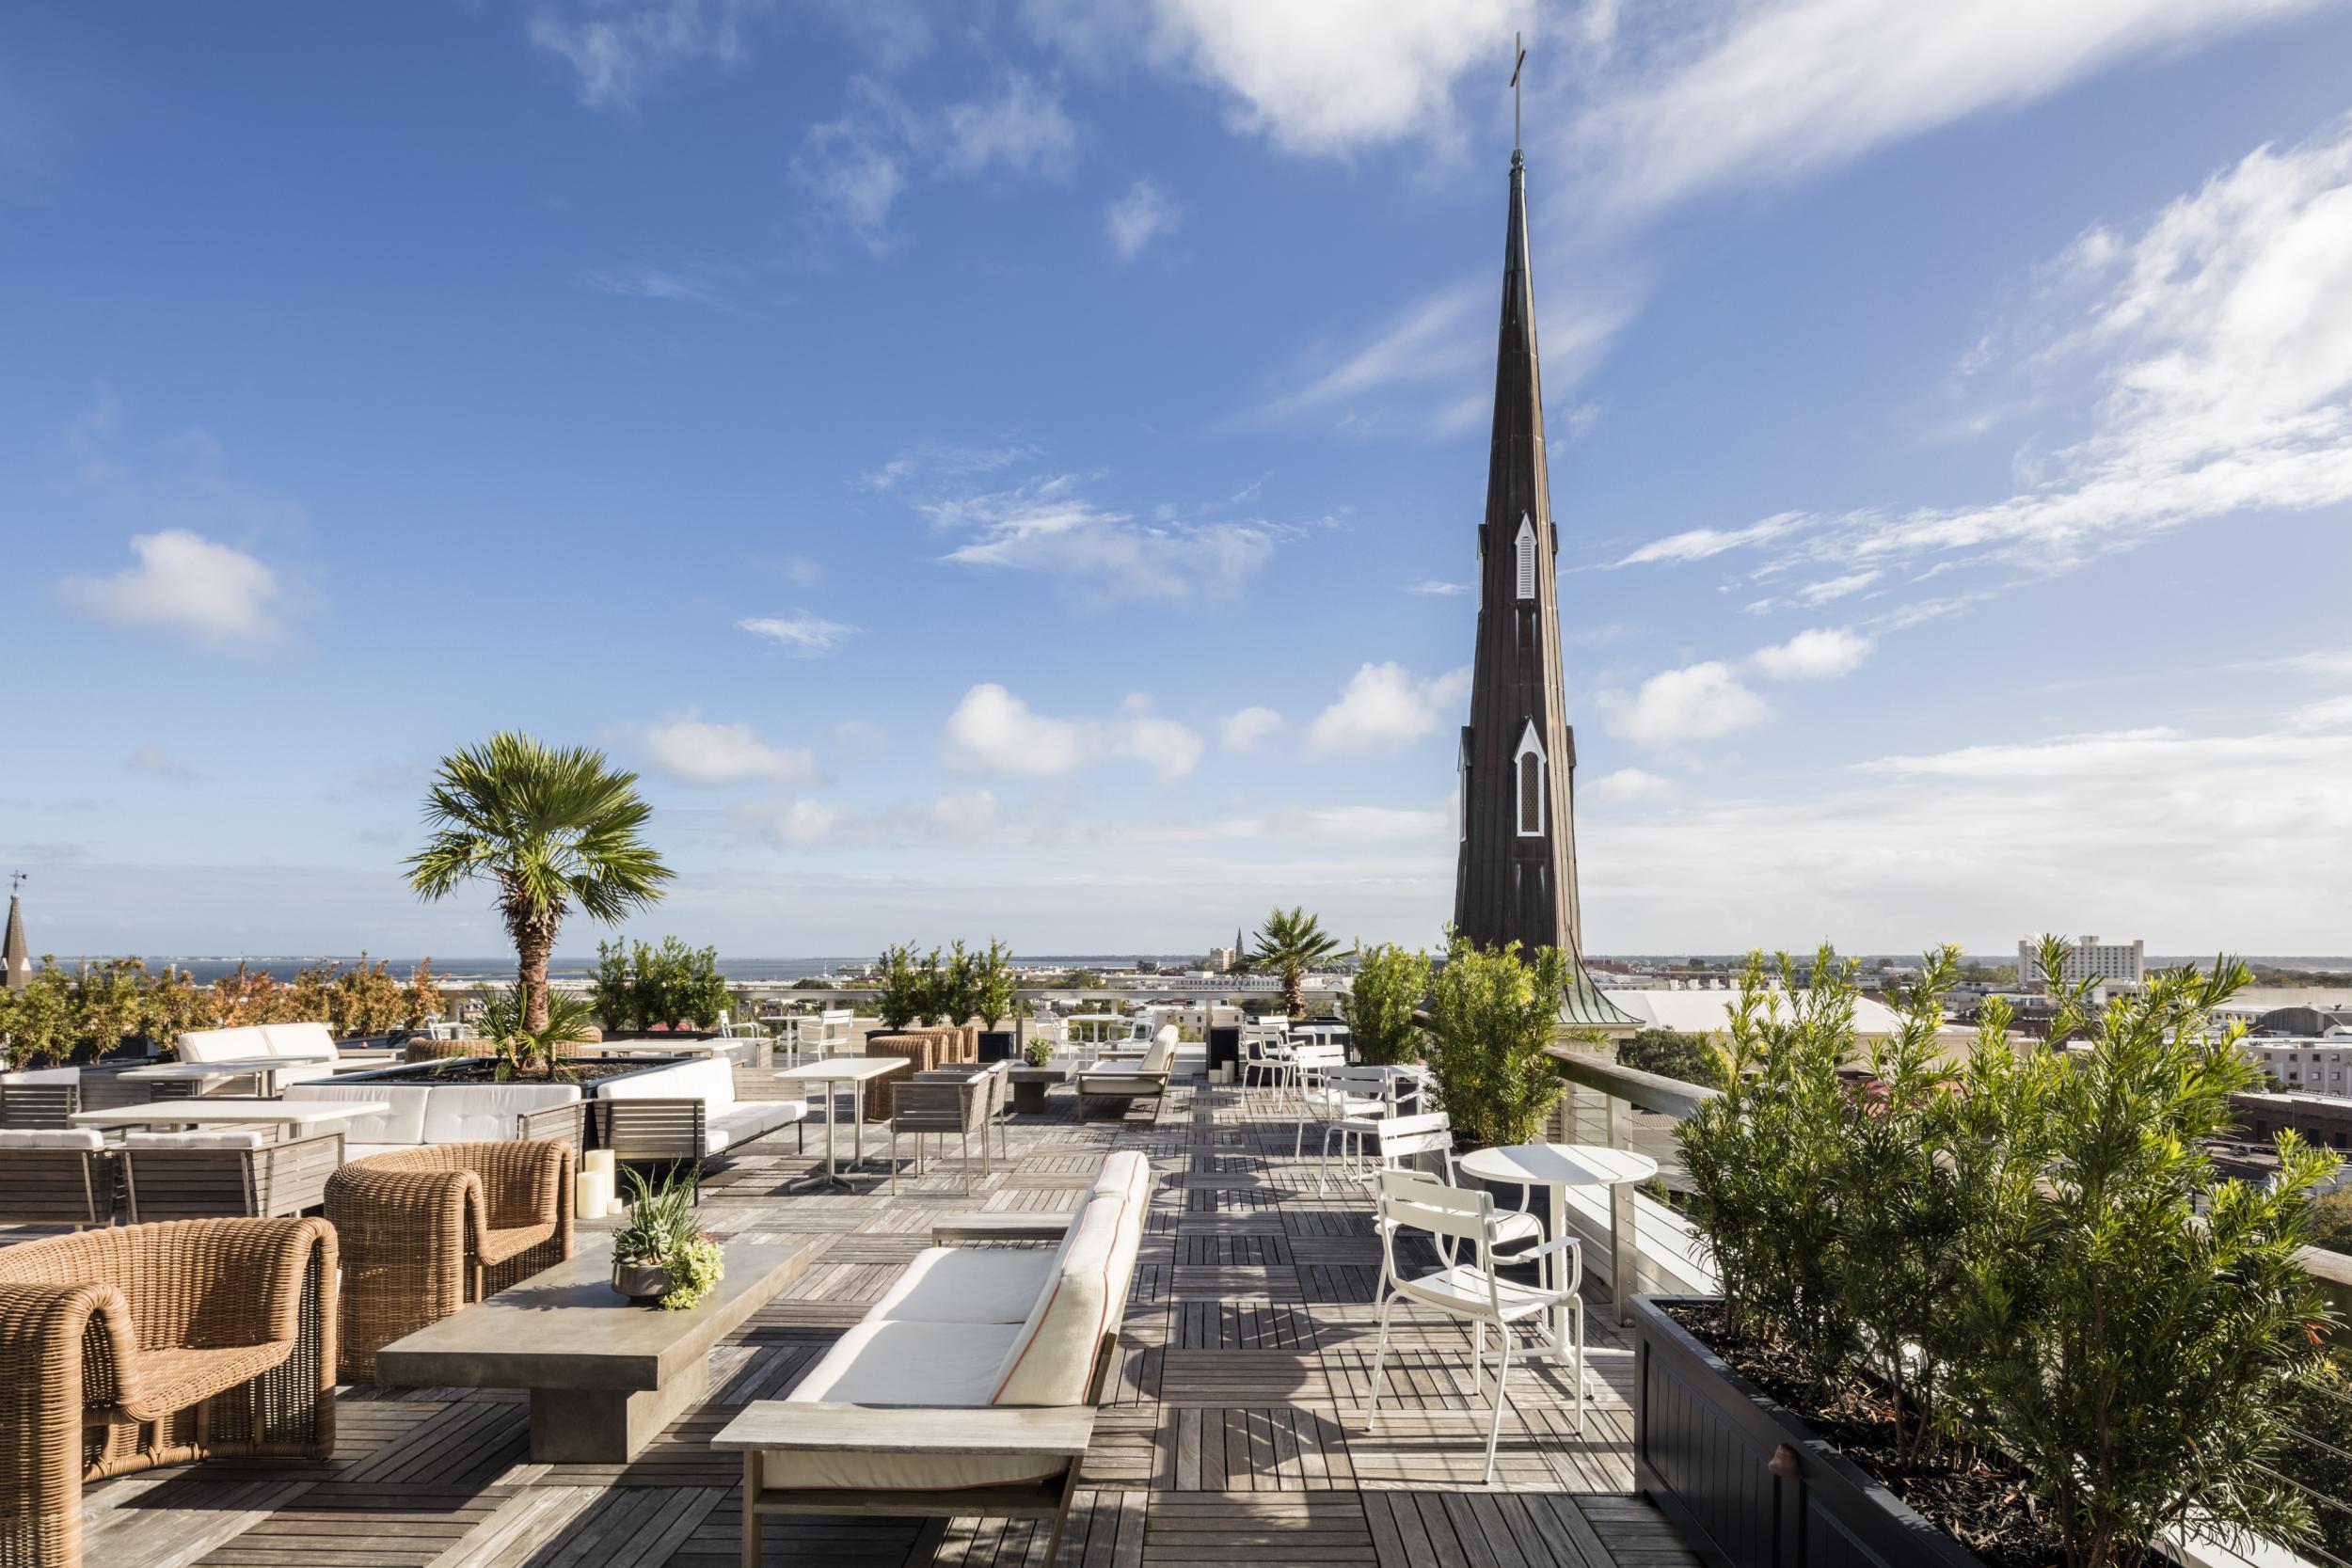 The Citrus Club, atop the Dewberry Hotel, is a great spot to admire the view